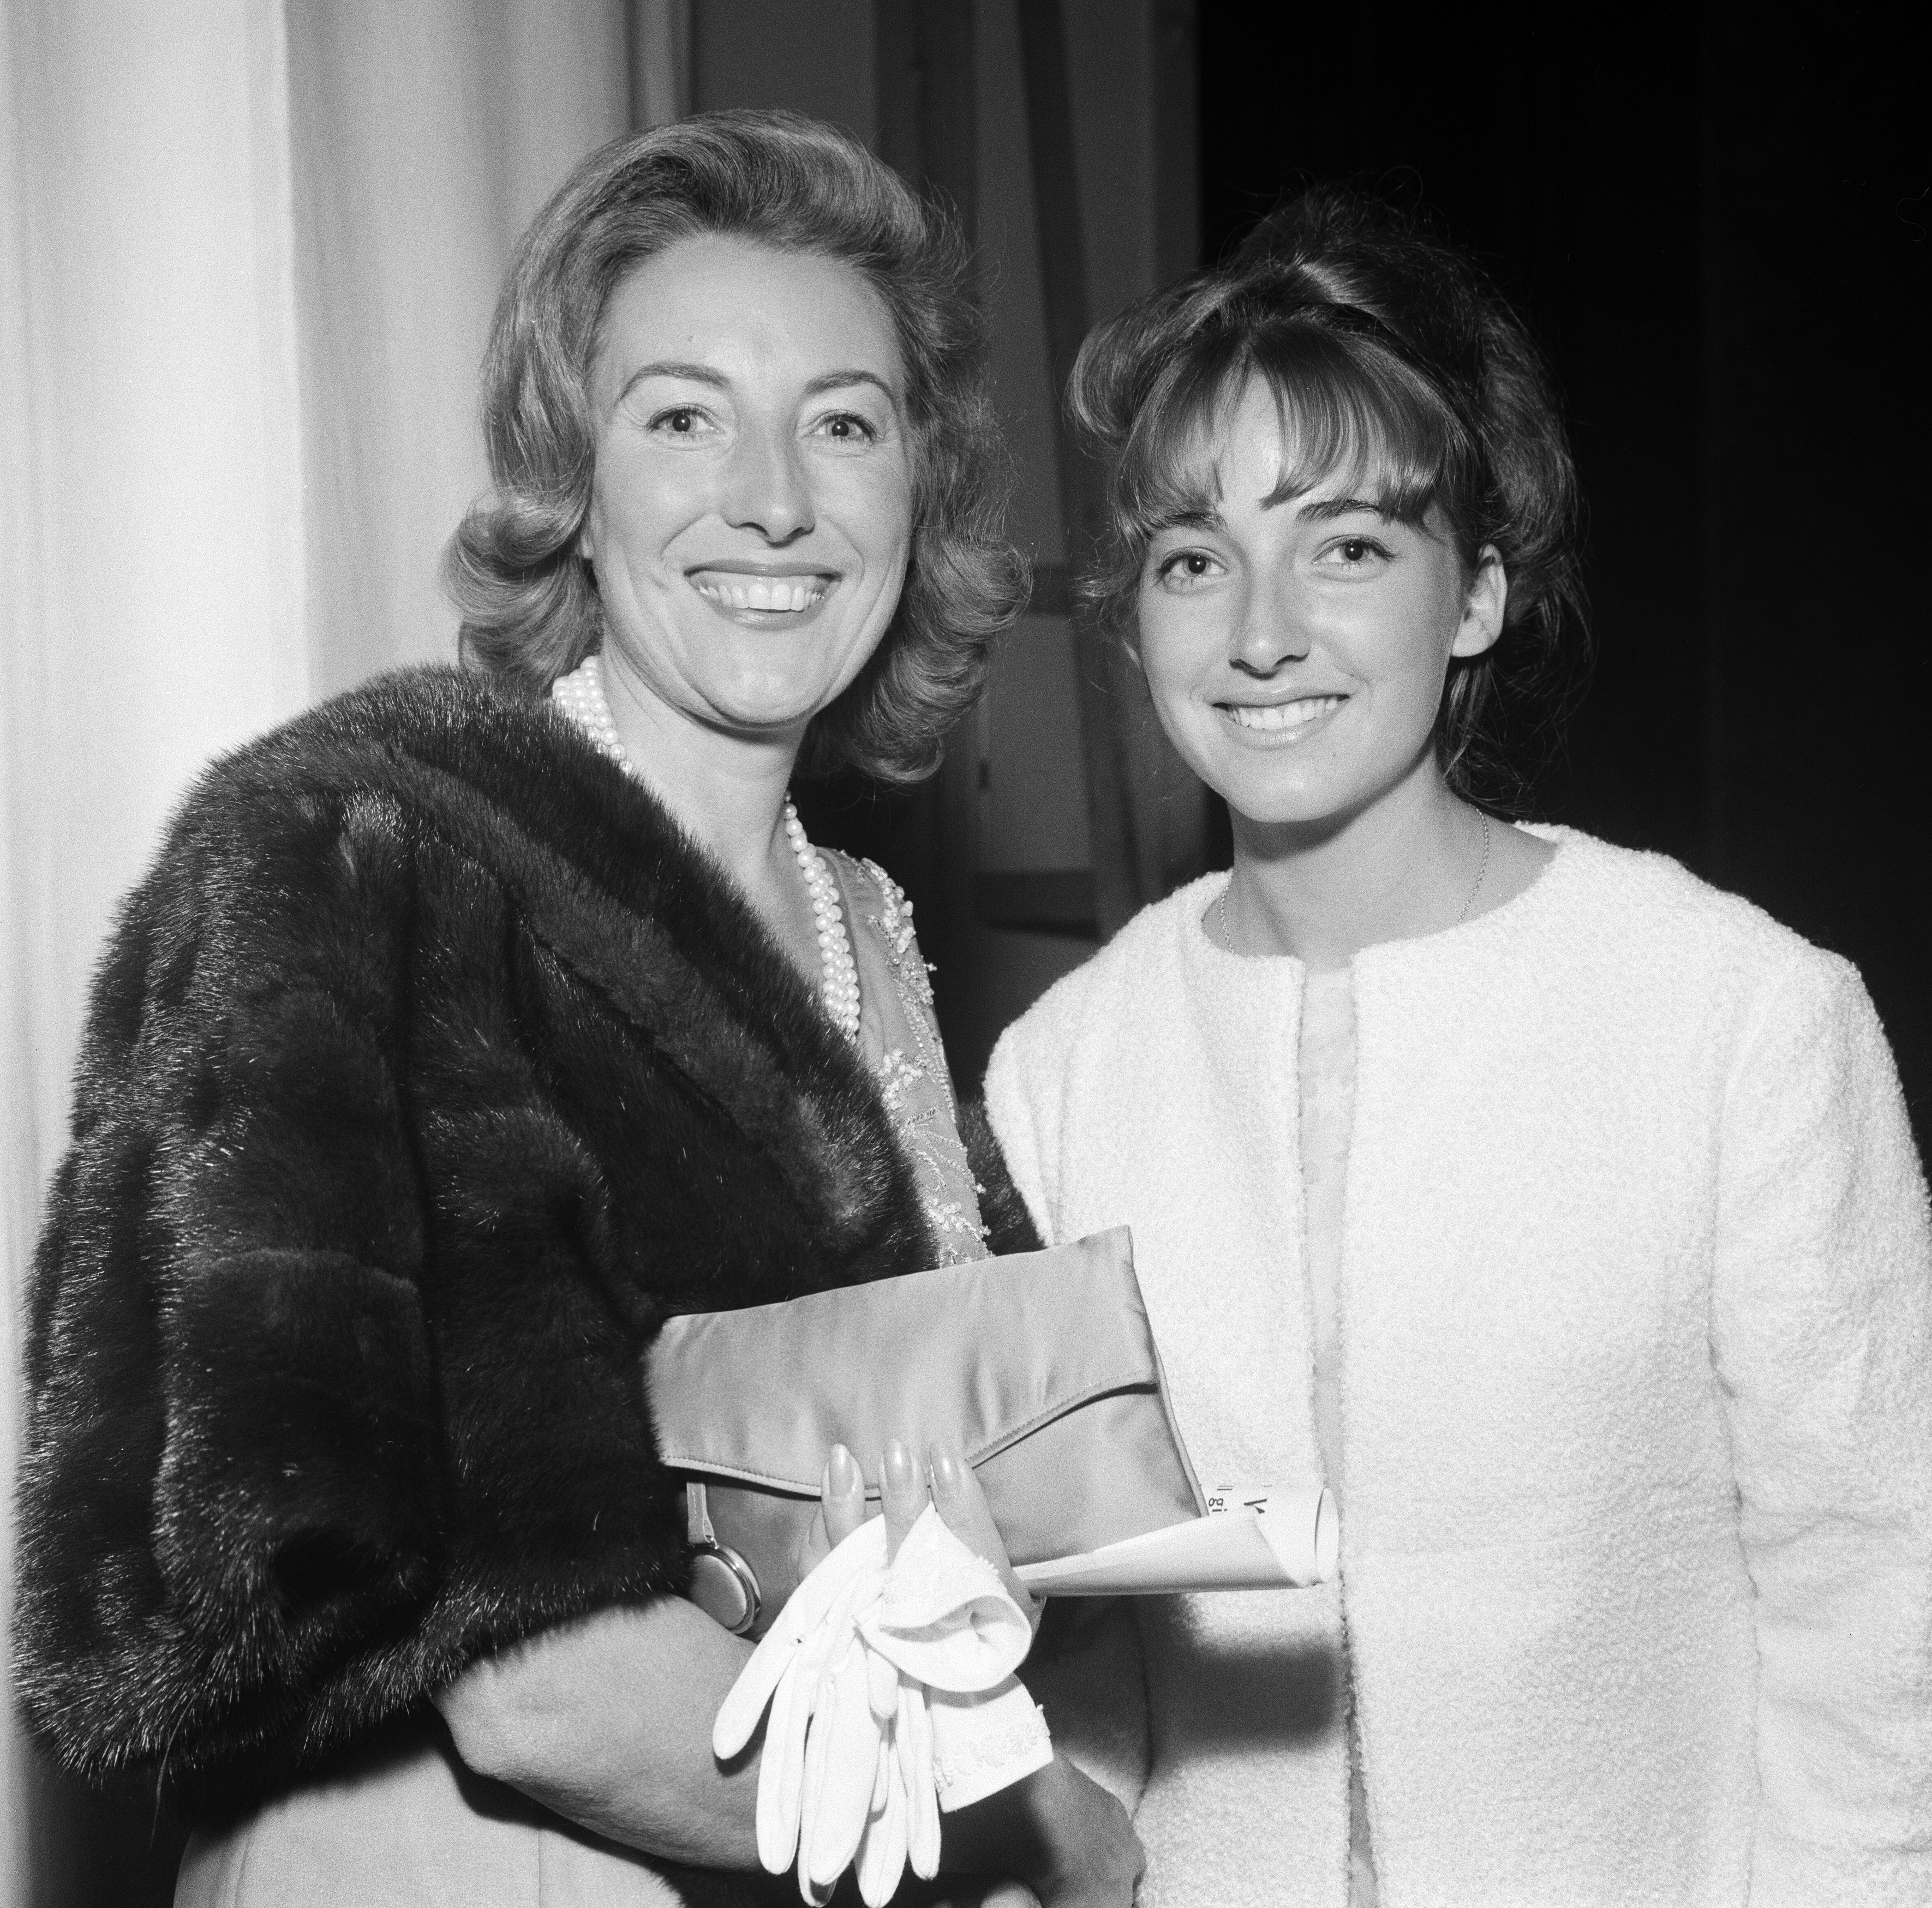 Vera Lynn and her daughter Virginia attend the premiere of "Camelot" at the Theatre Royal on August 20, 1964. | Source: Getty Images